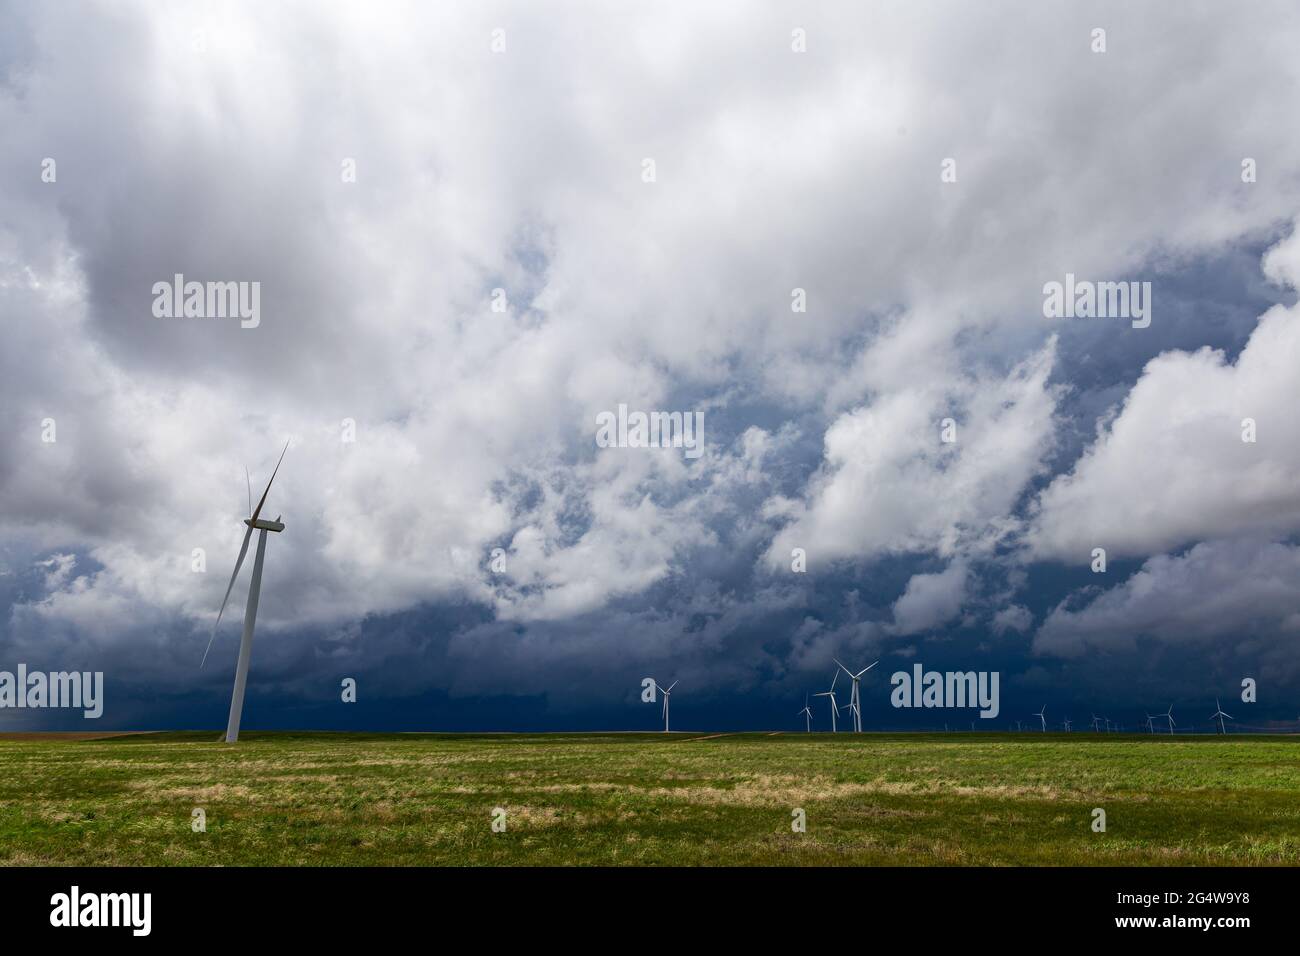 Ominous storms in the skies over the eastern Colorado plains with numerous windmills spread across the prairie Stock Photo